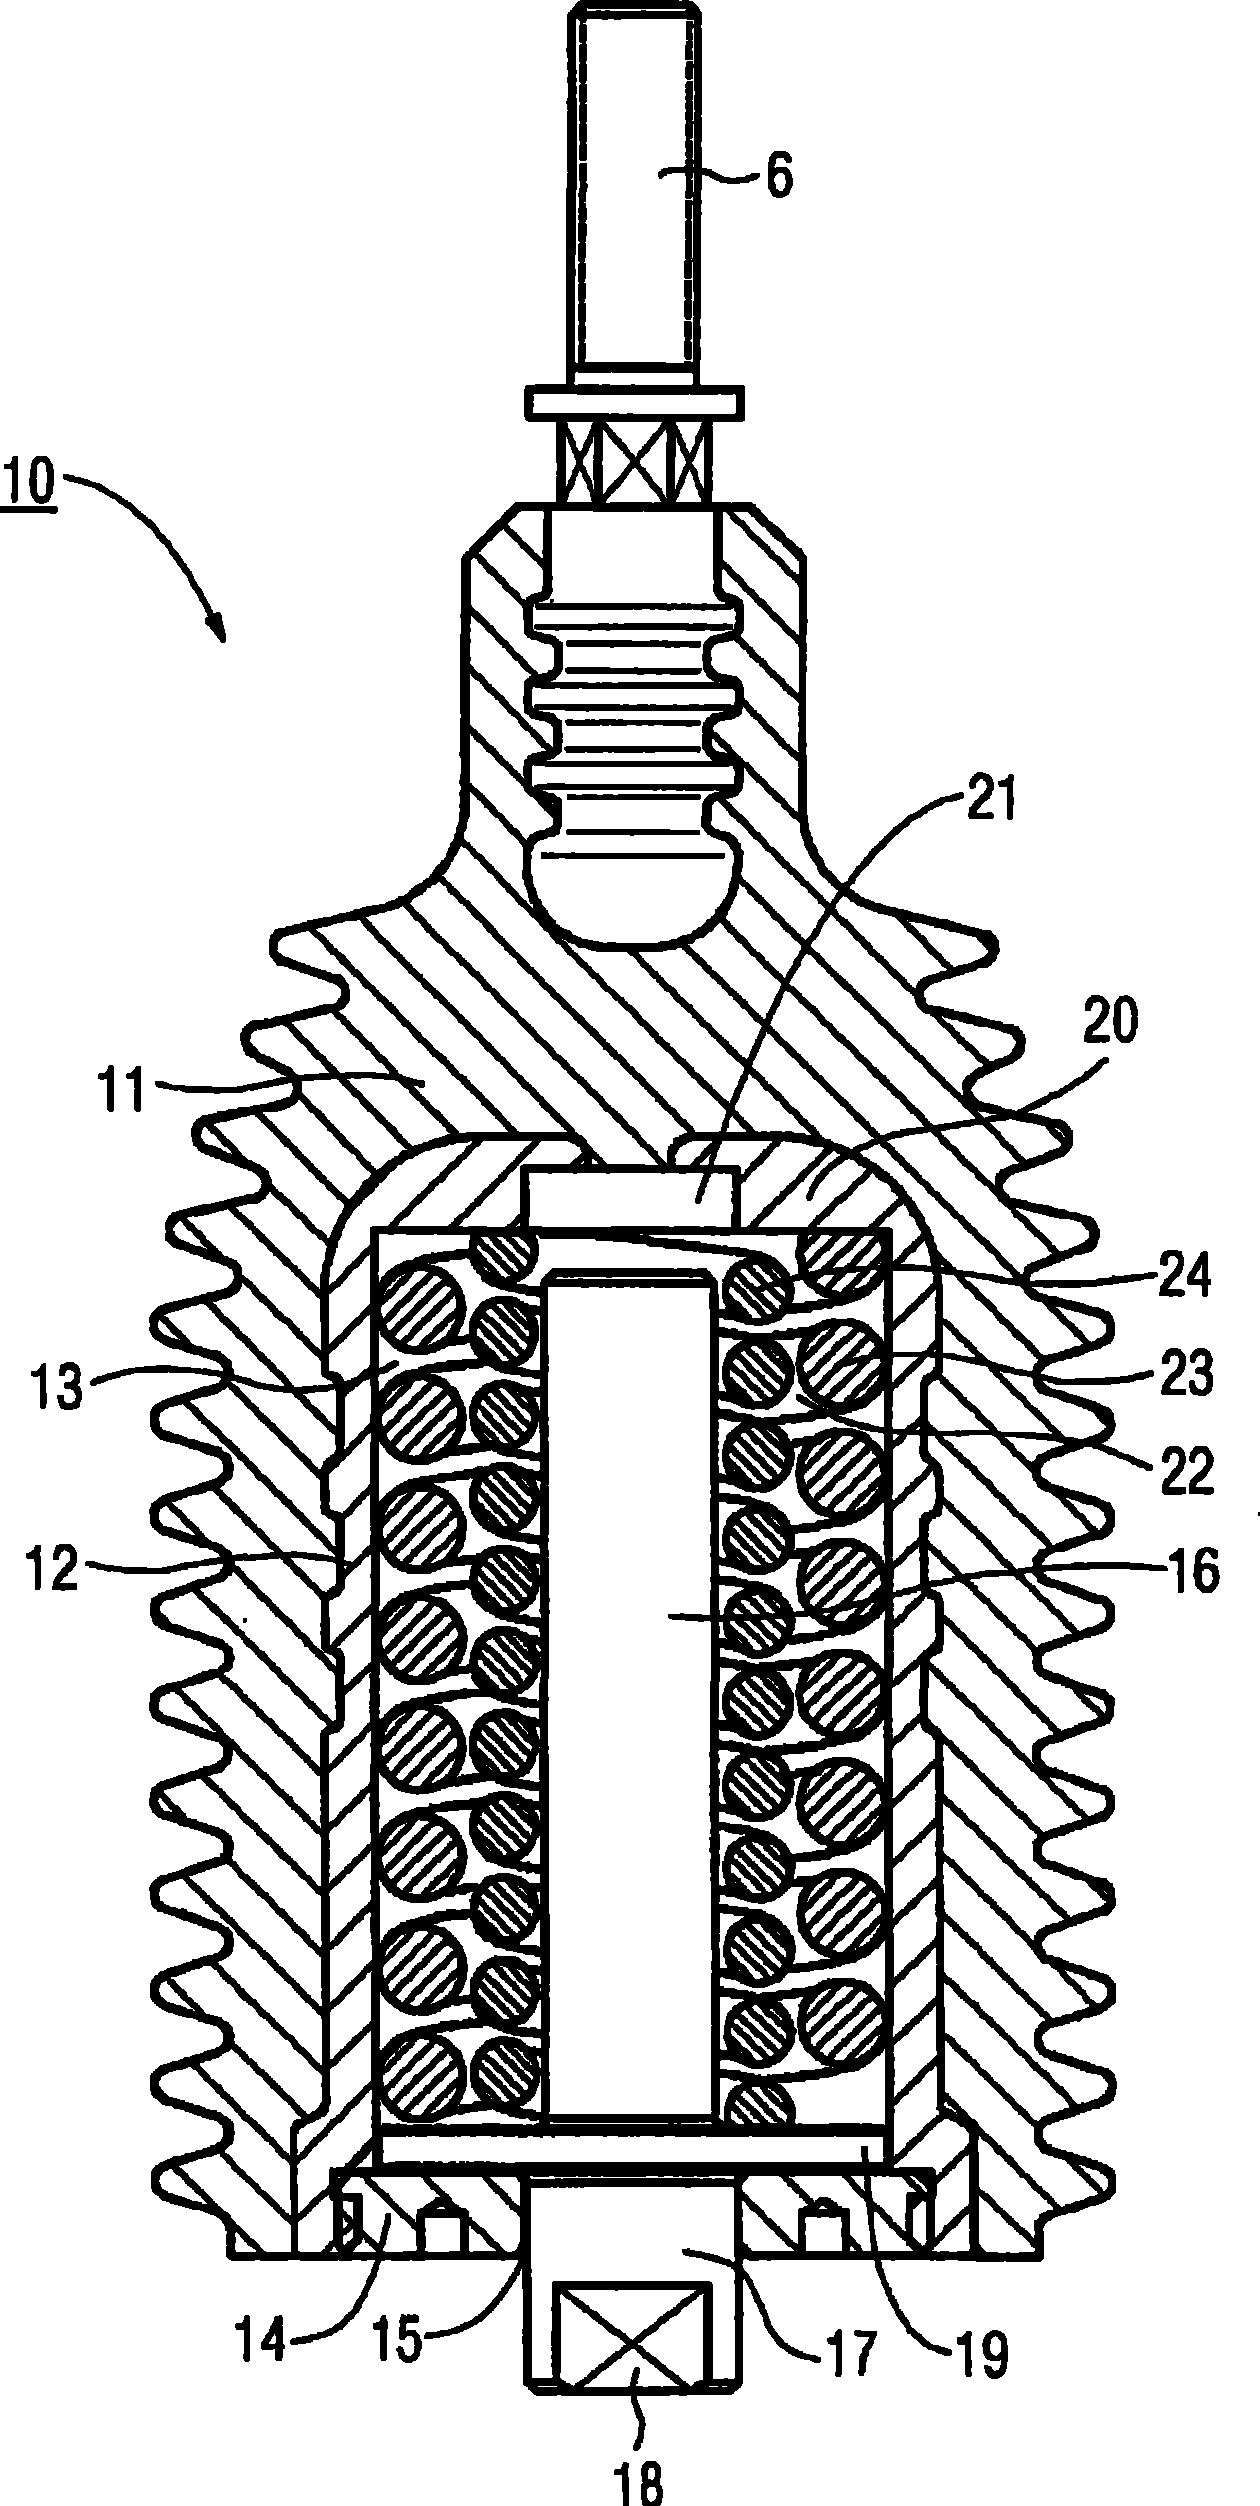 Insulating switching rod with a contact pressure arrangement comprising a plurality of helical compression springs wound in opposite senses